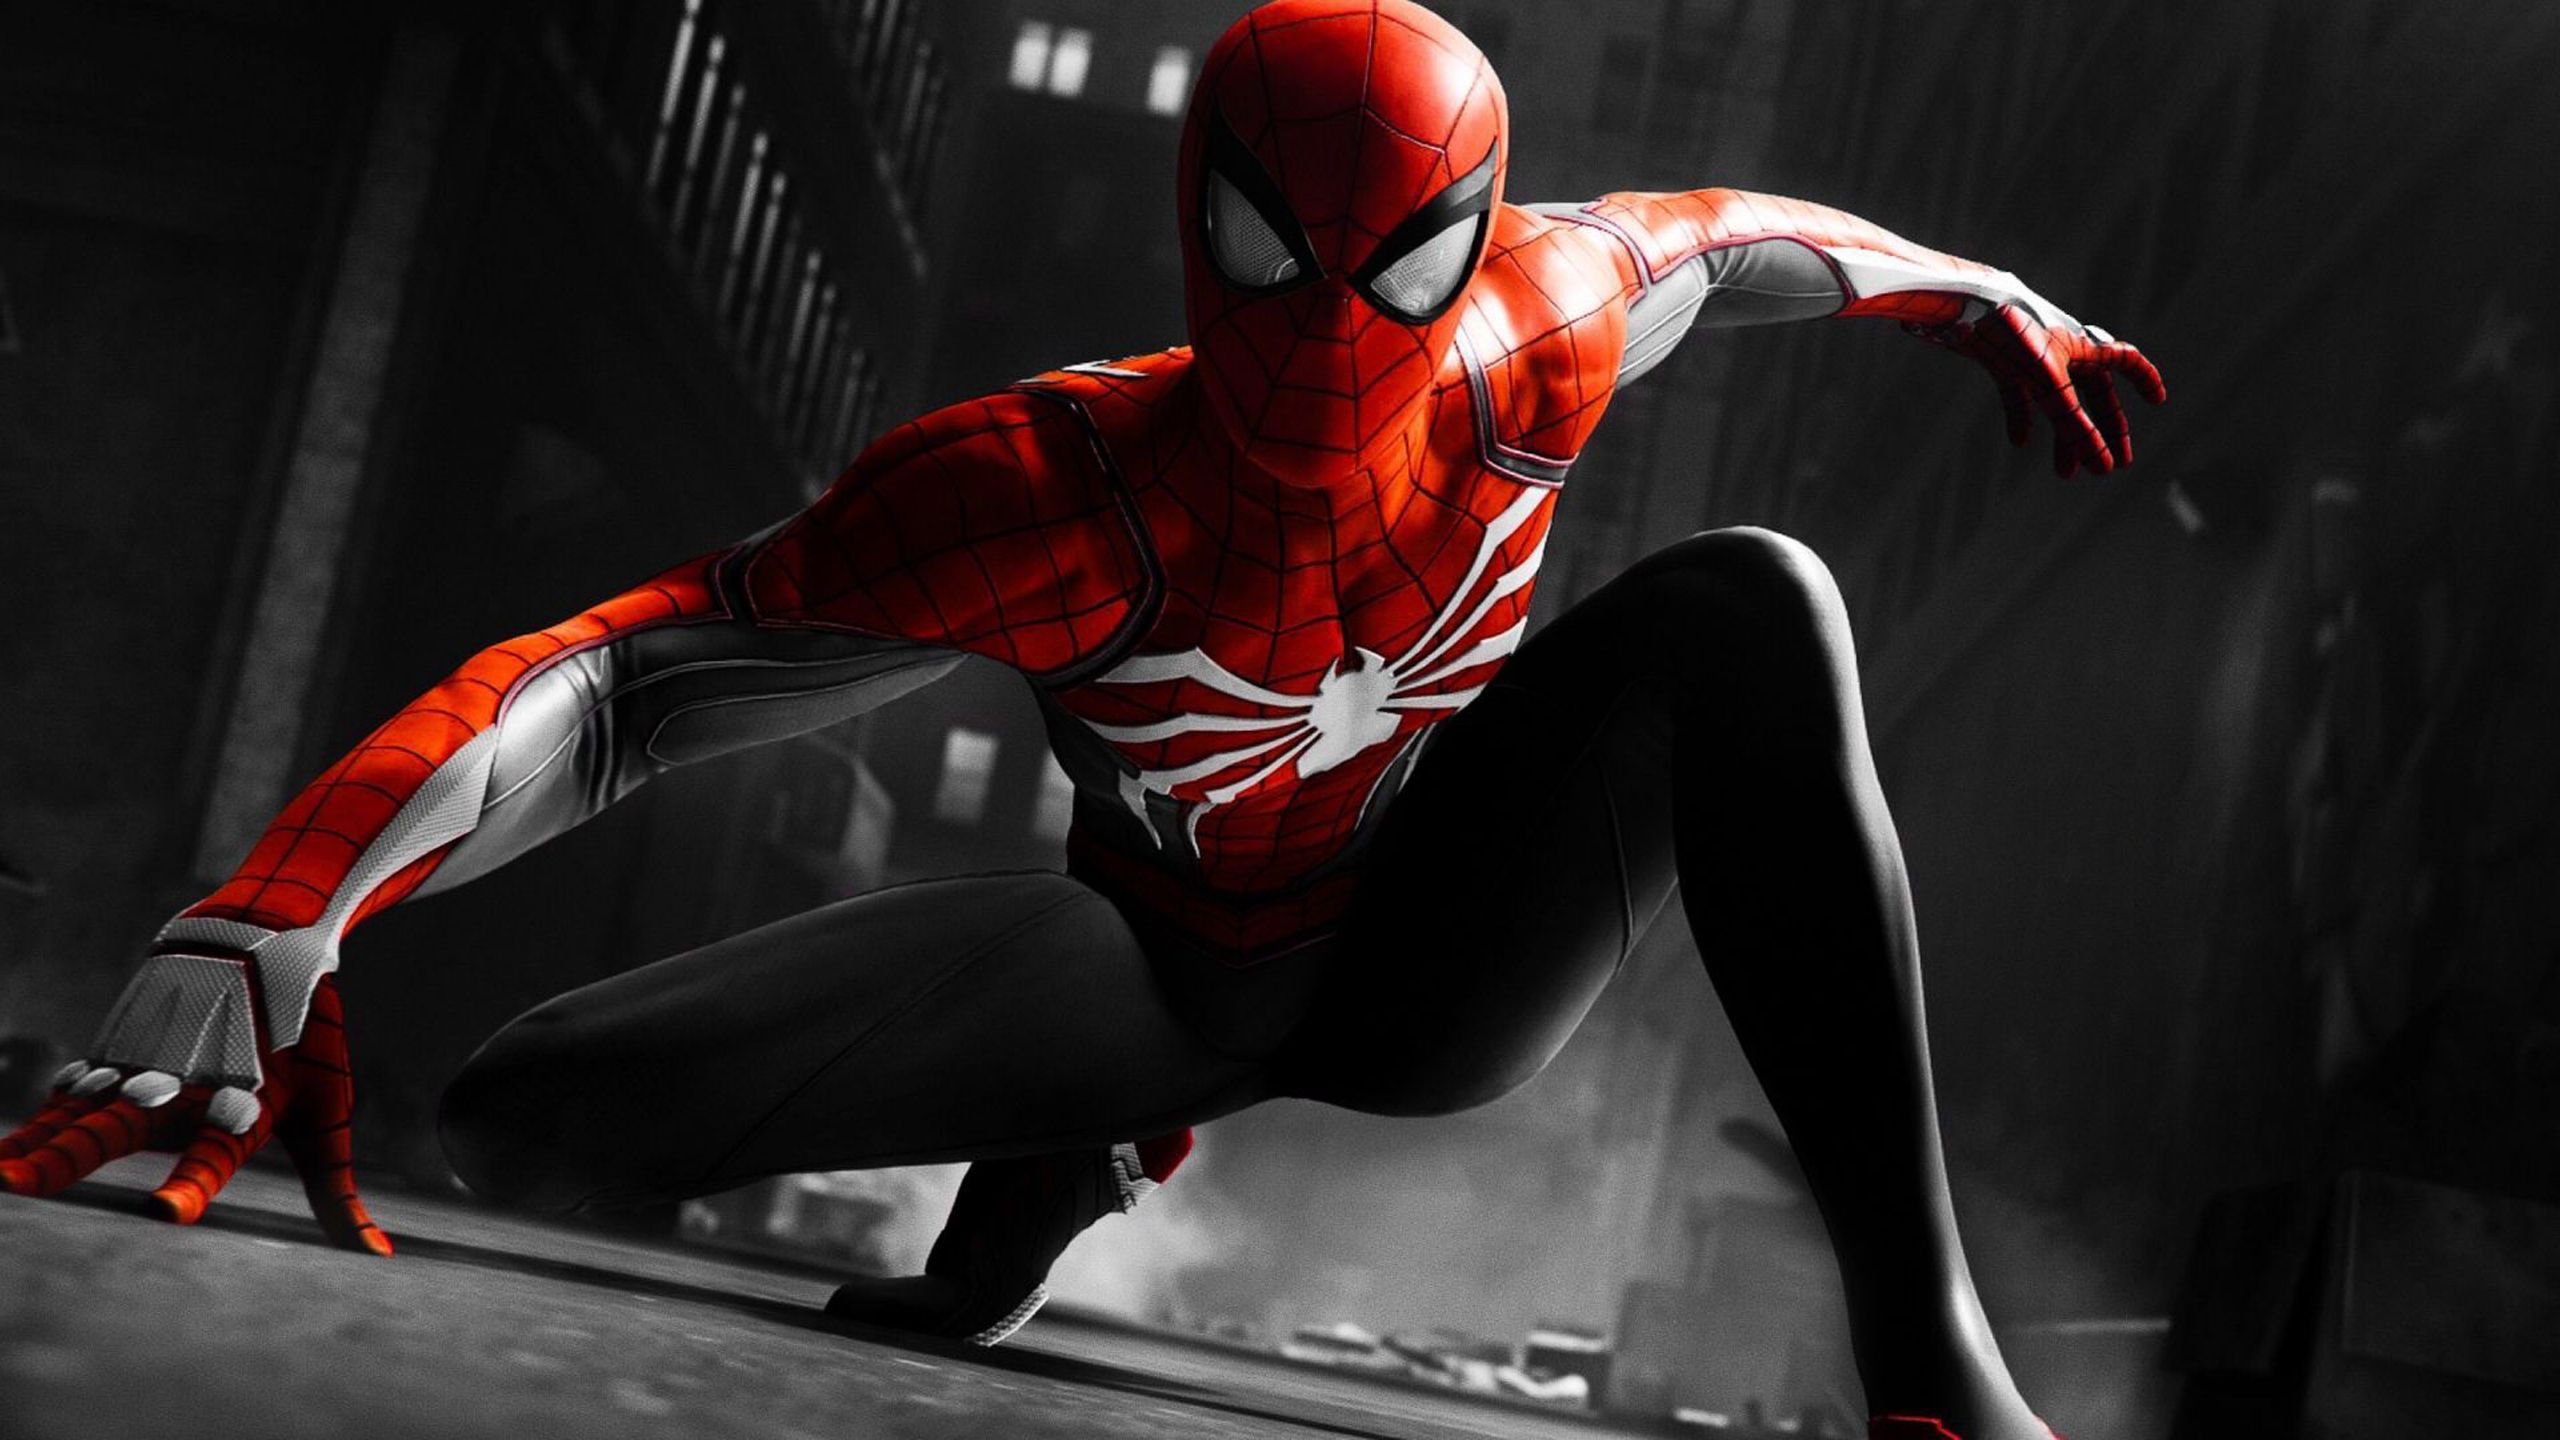 Spider man 2018 ps4 game wallpaper 60 images - 